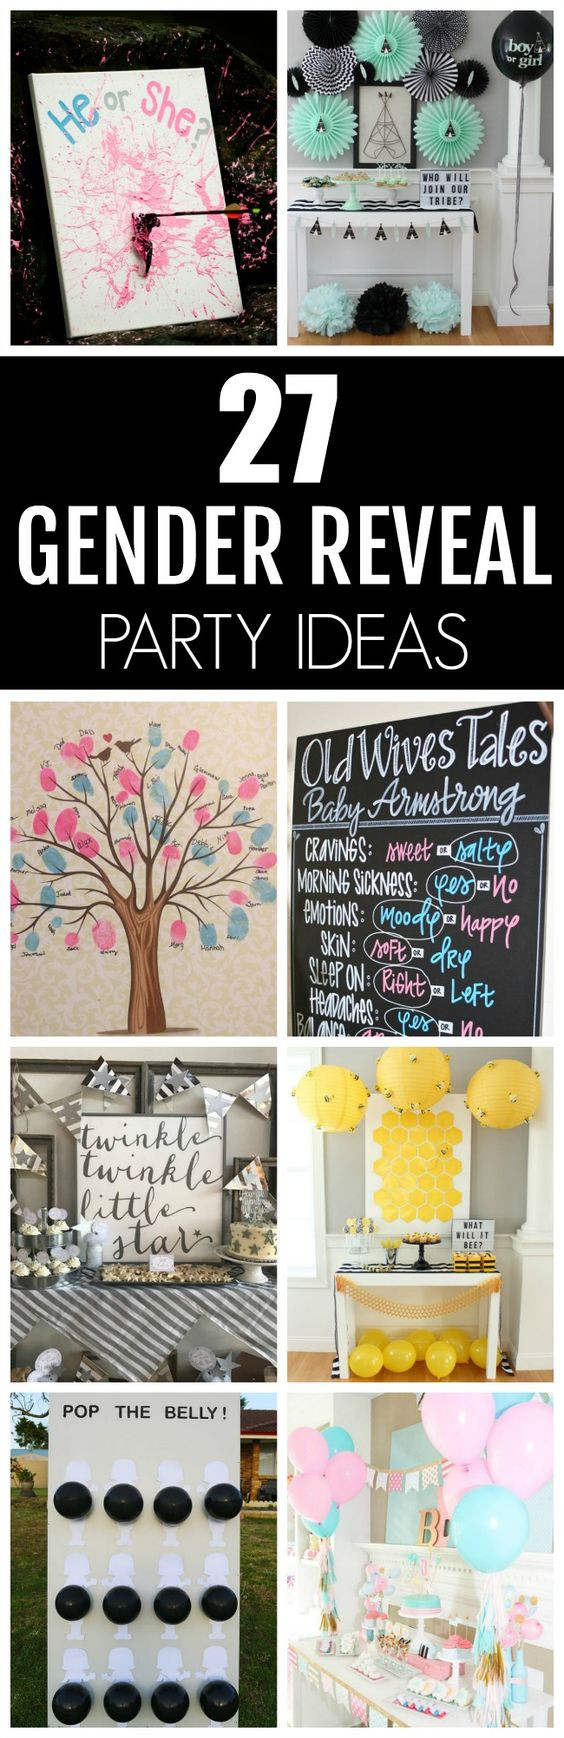 Inexpensive Gender Reveal Party Ideas
 27 Creative Gender Reveal Party Ideas Pretty My Party